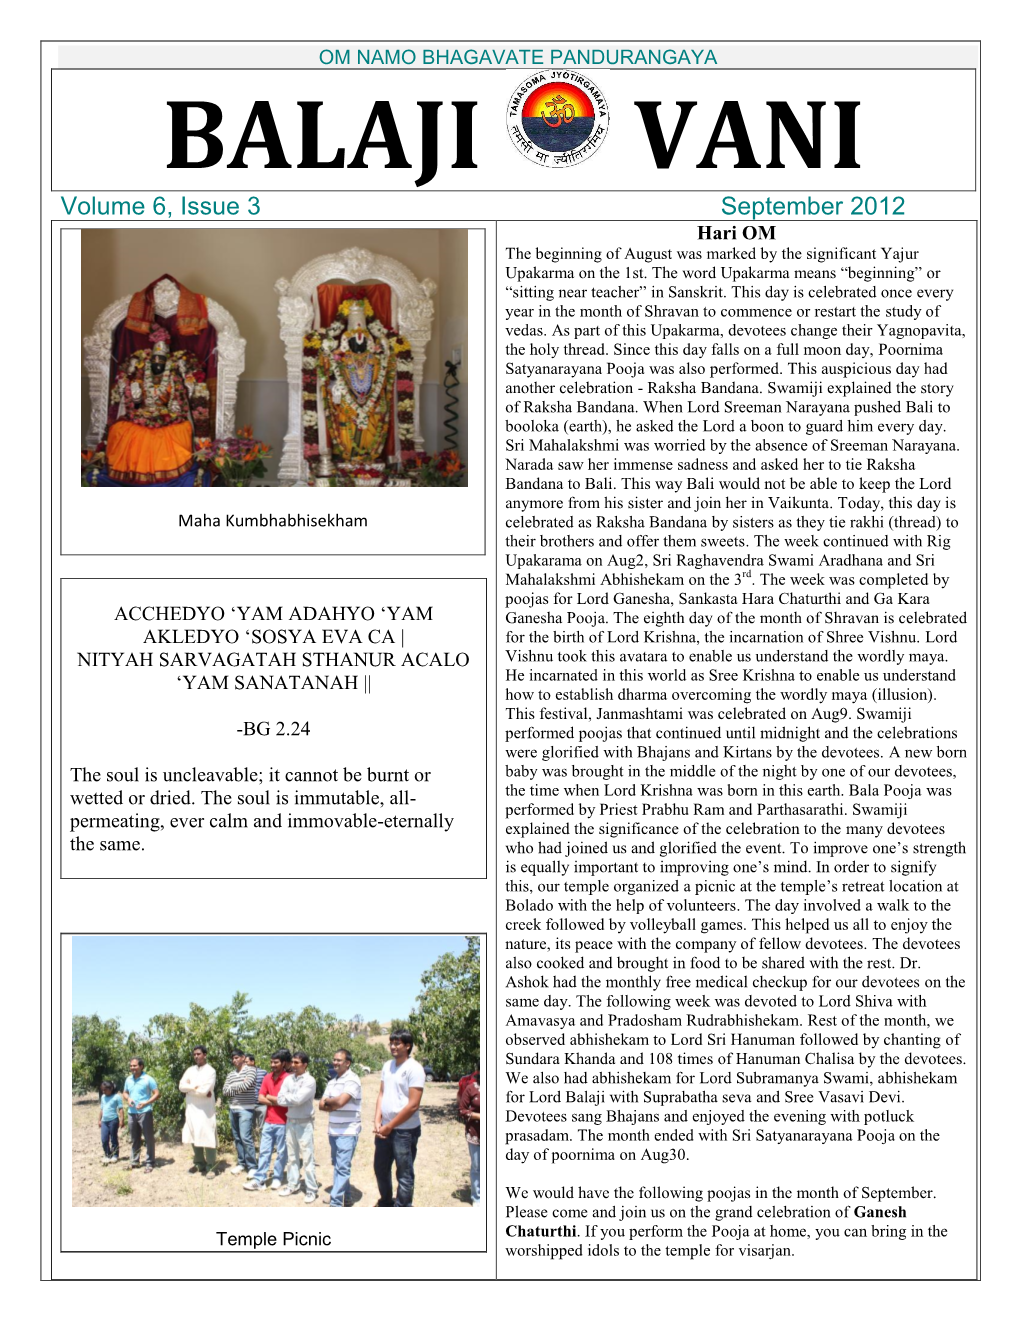 BALAJI VANI Volume 6, Issue 3 September 2012 Hari OM the Beginning of August Was Marked by the Significant Yajur Upakarma on the 1St